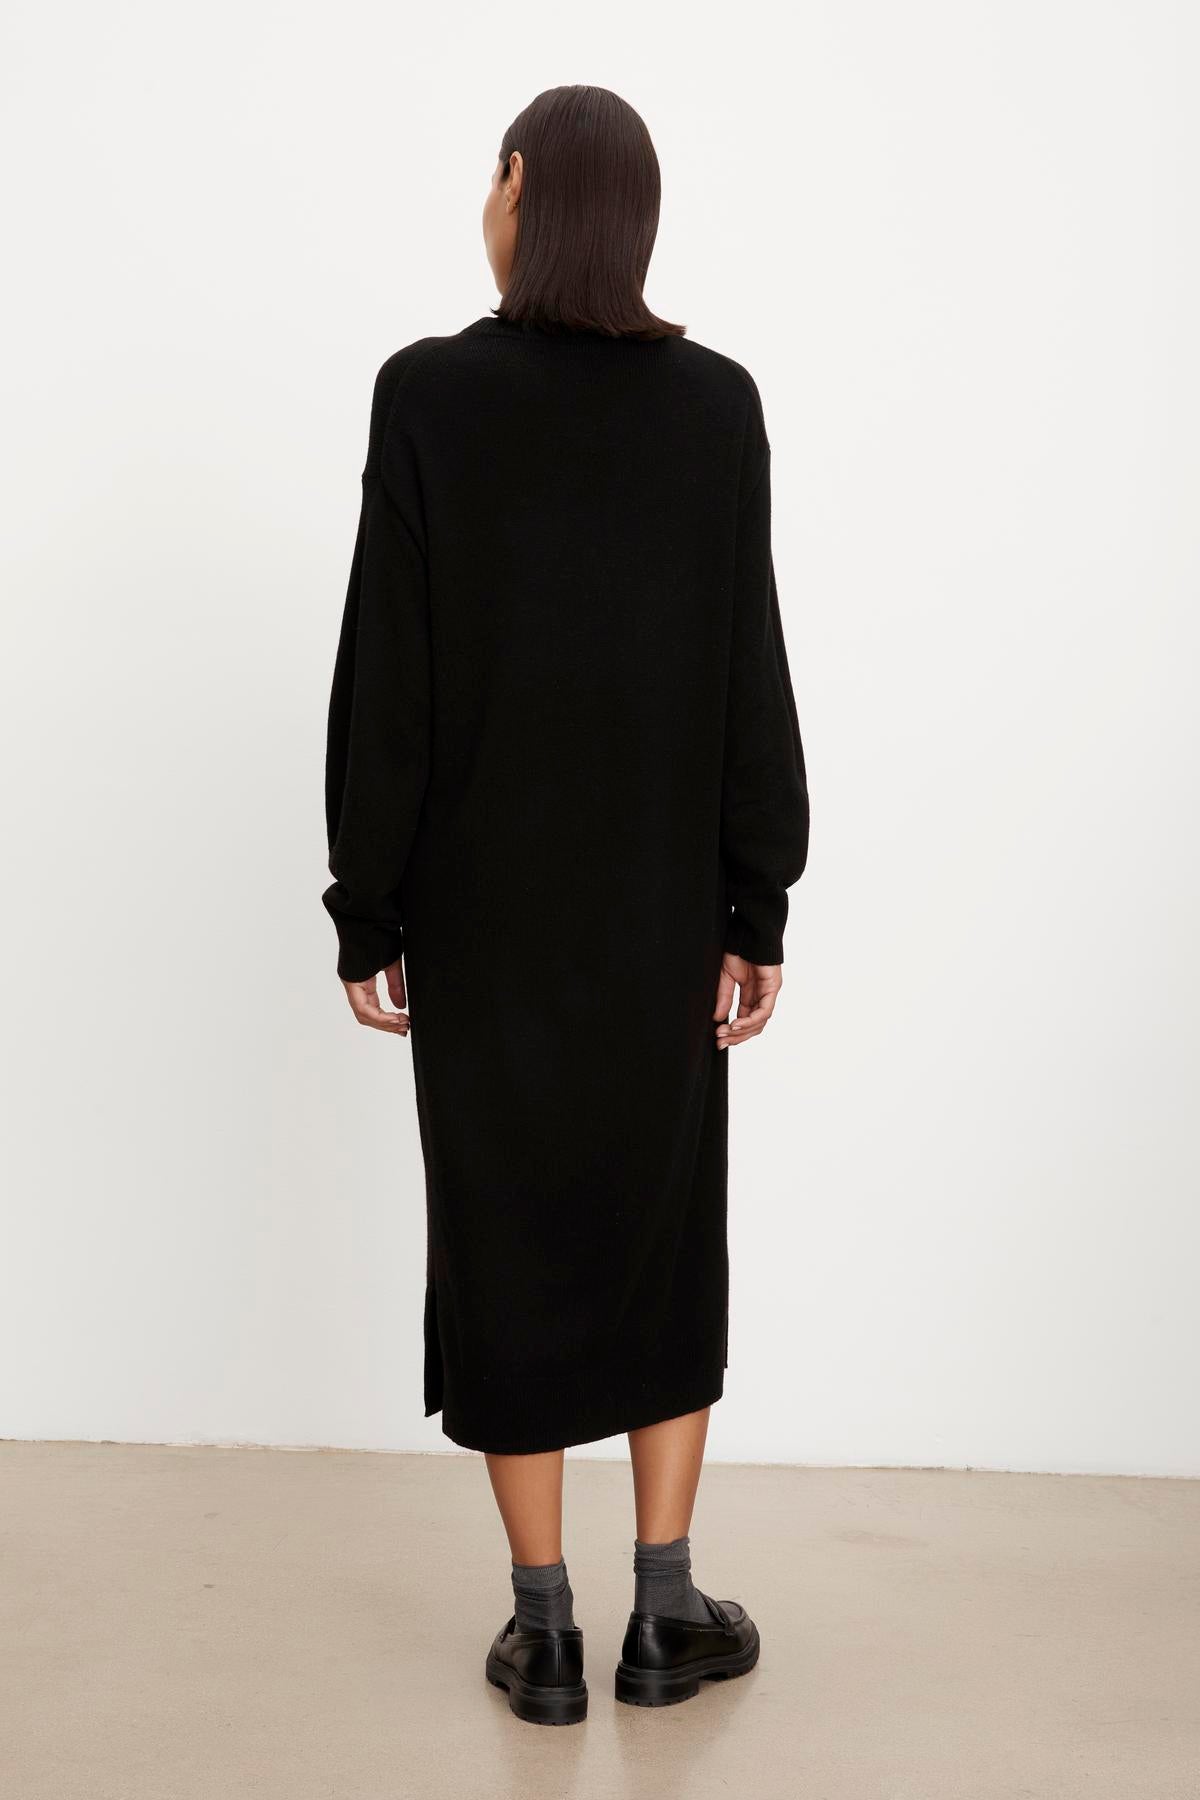   A woman from behind, wearing a KADEN SWEATER DRESS by Velvet by Graham & Spencer with a side split hem and black boots, standing against a plain white background. 